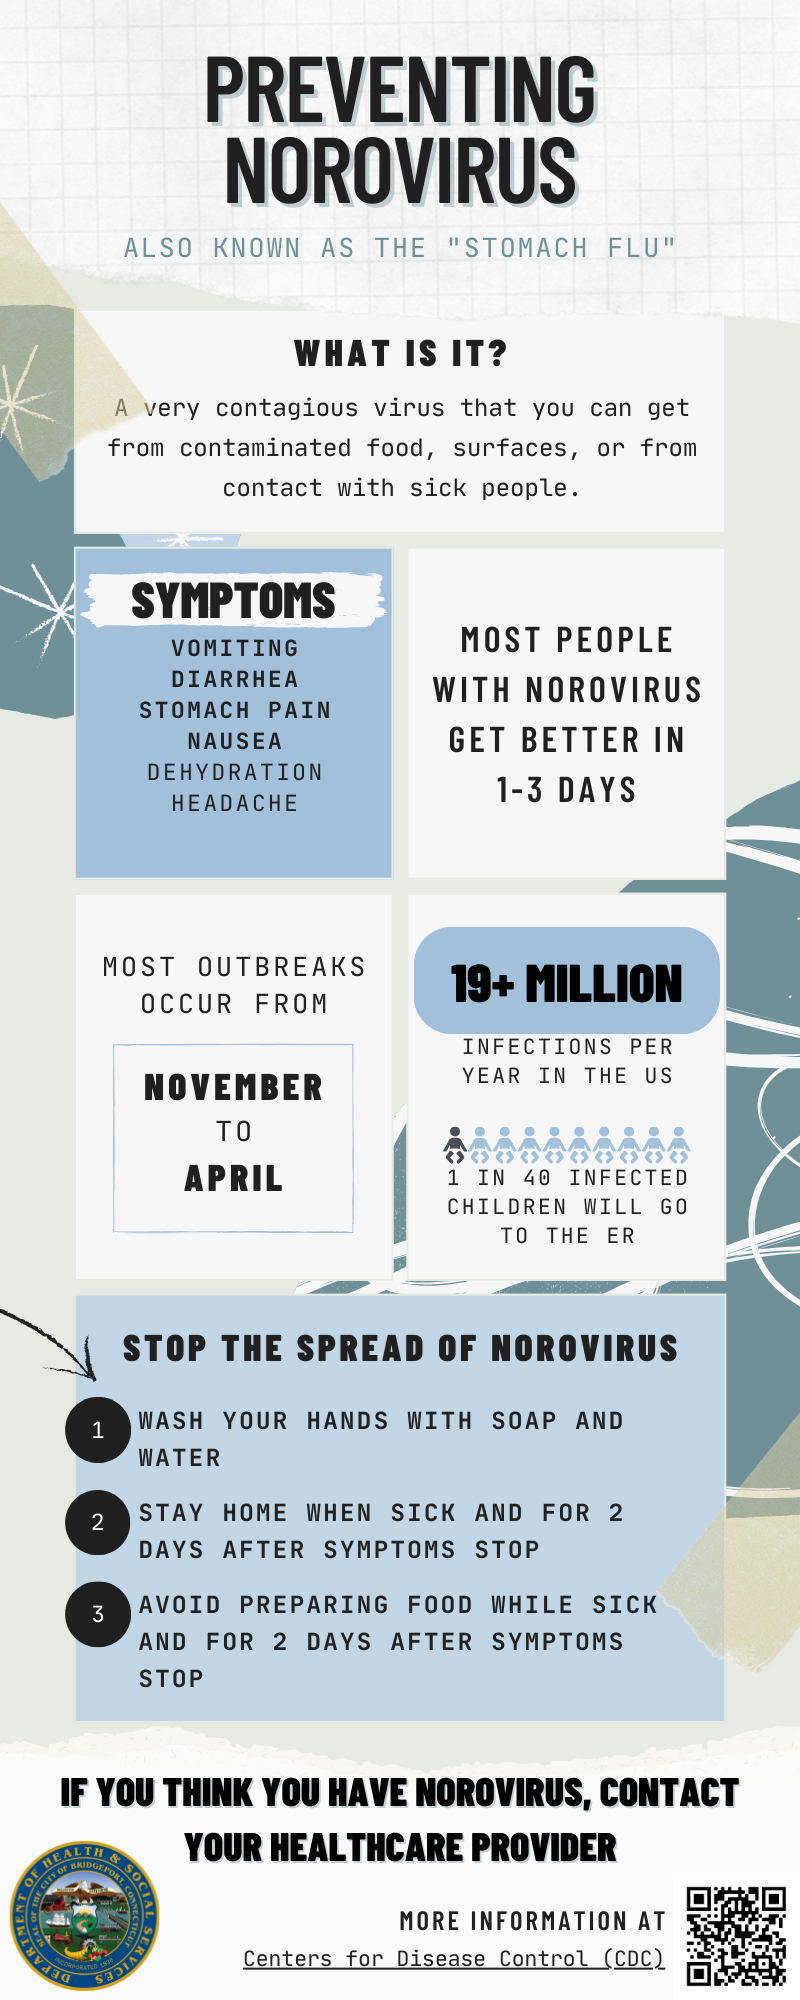 Infographic showing the incidence of norovirus infections as well as tips for prevention